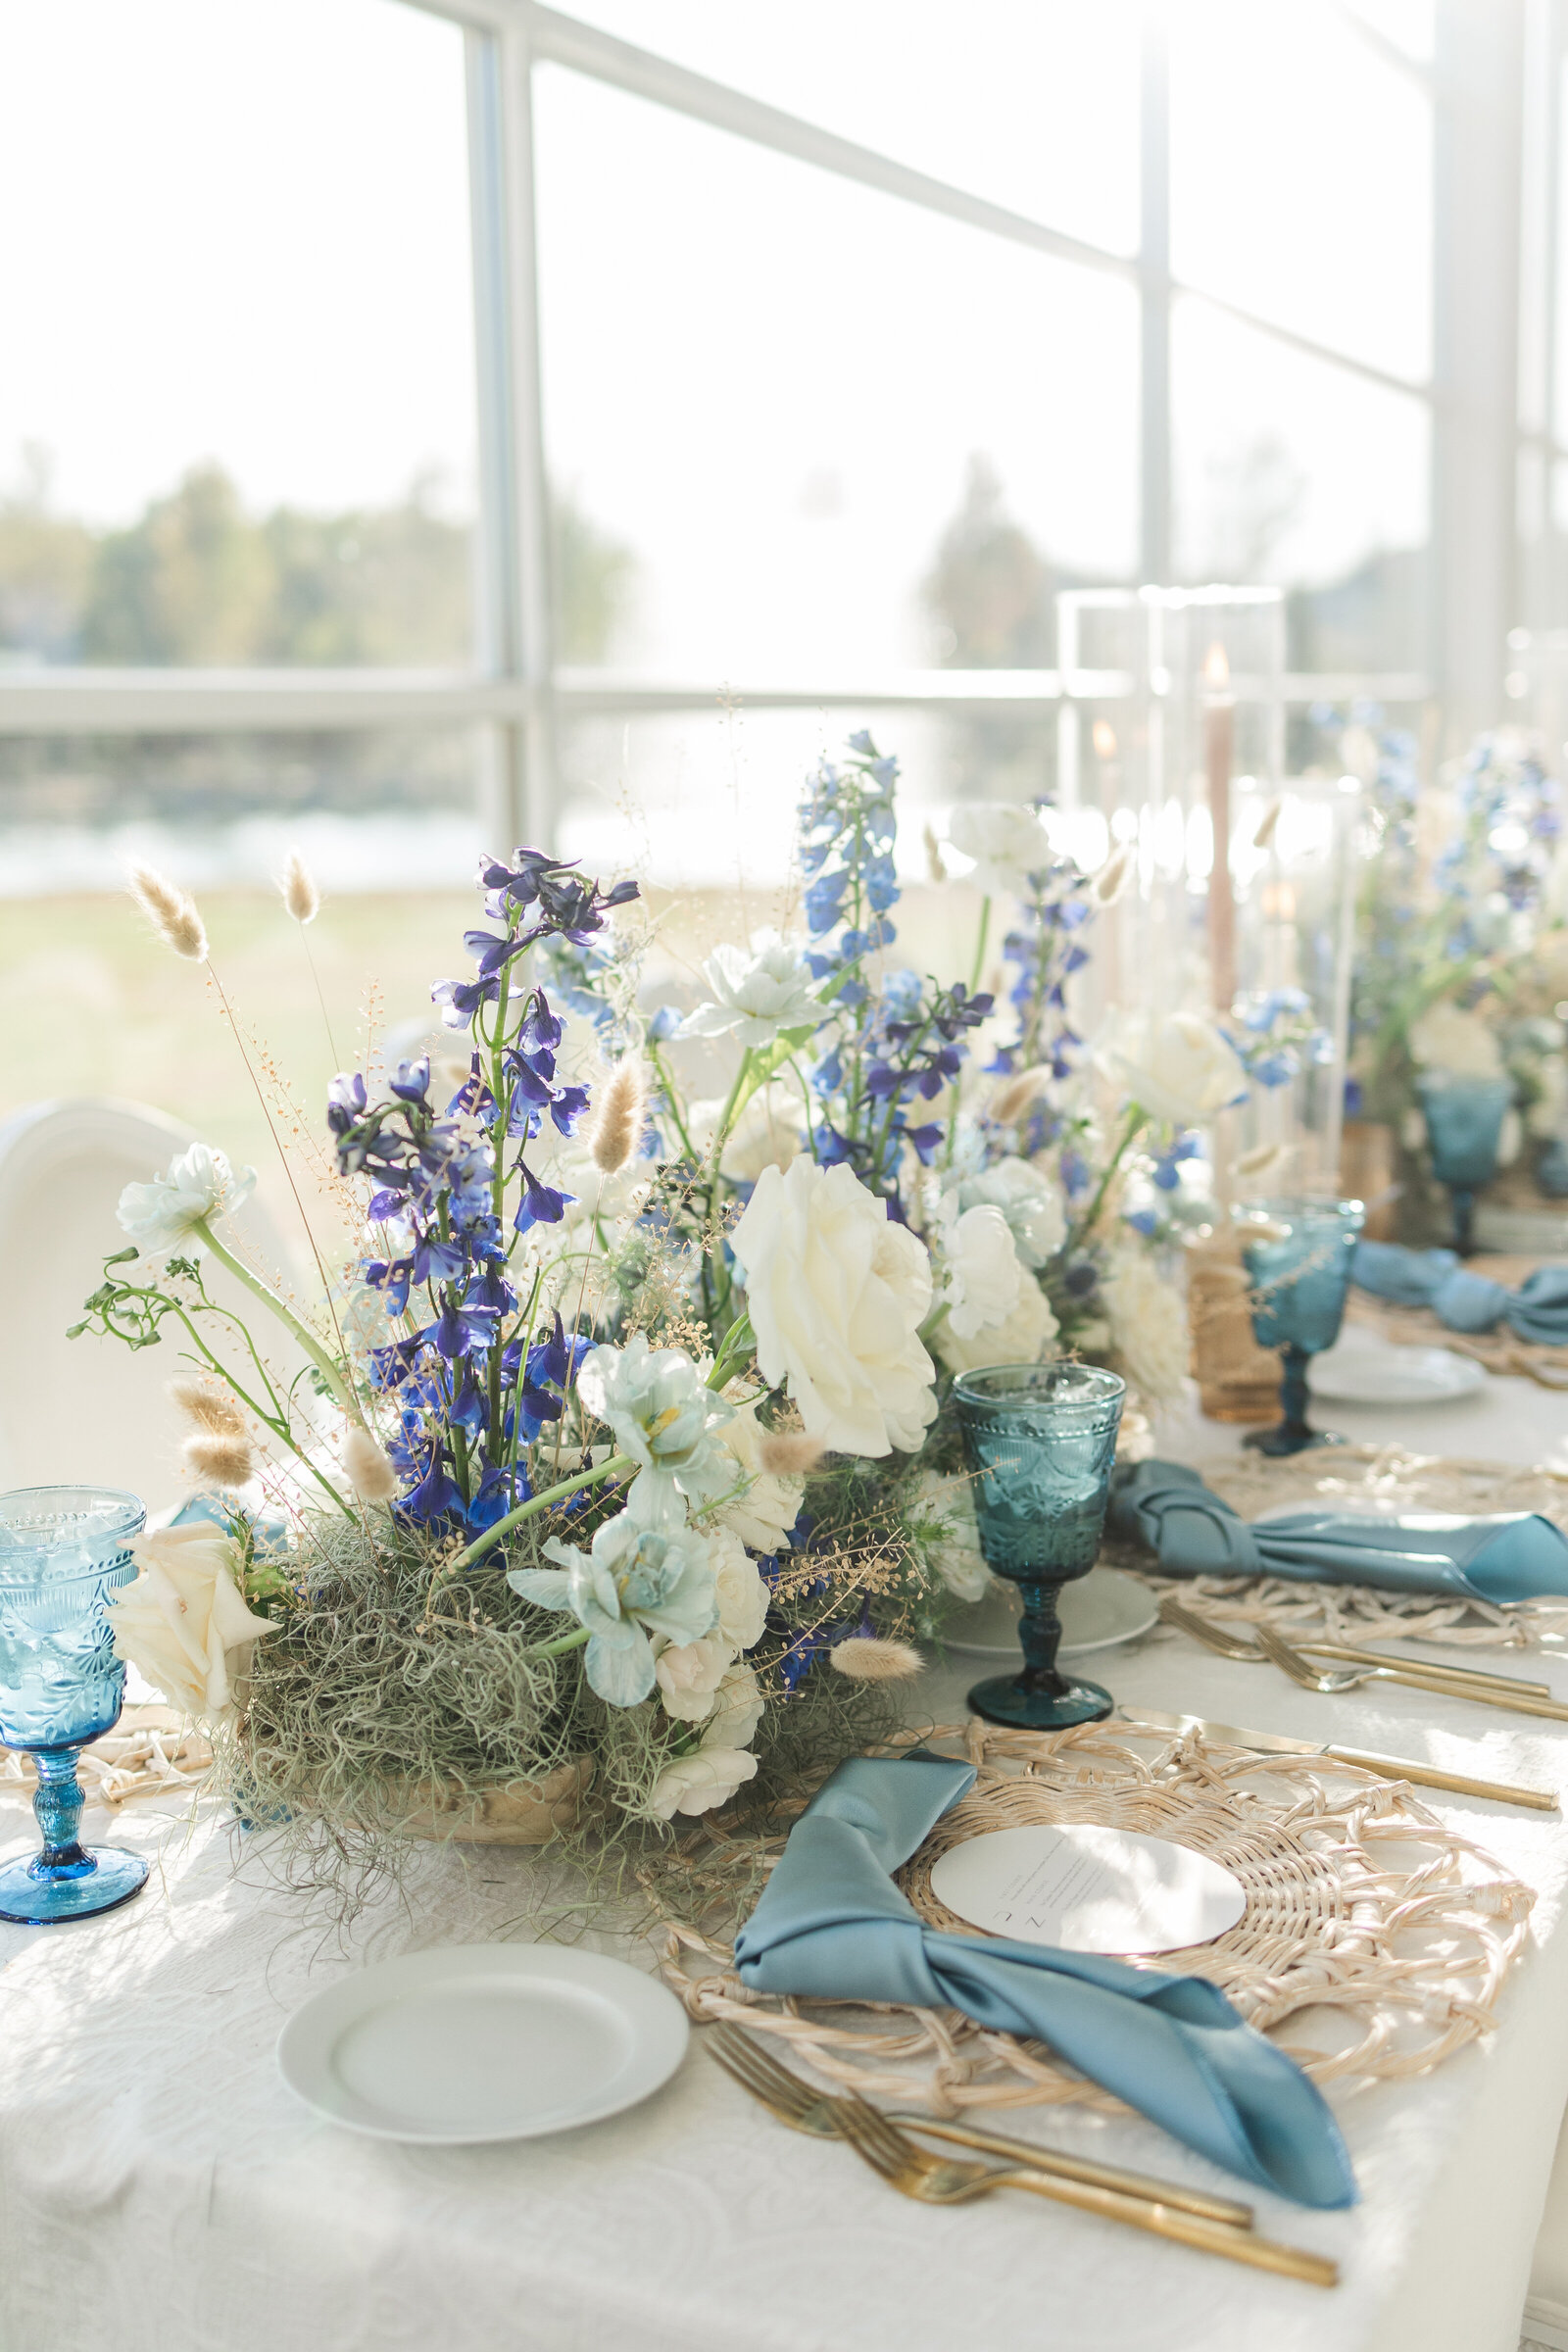 Luxurious floral arrangements decorate the head table, with a water fountain in the background.